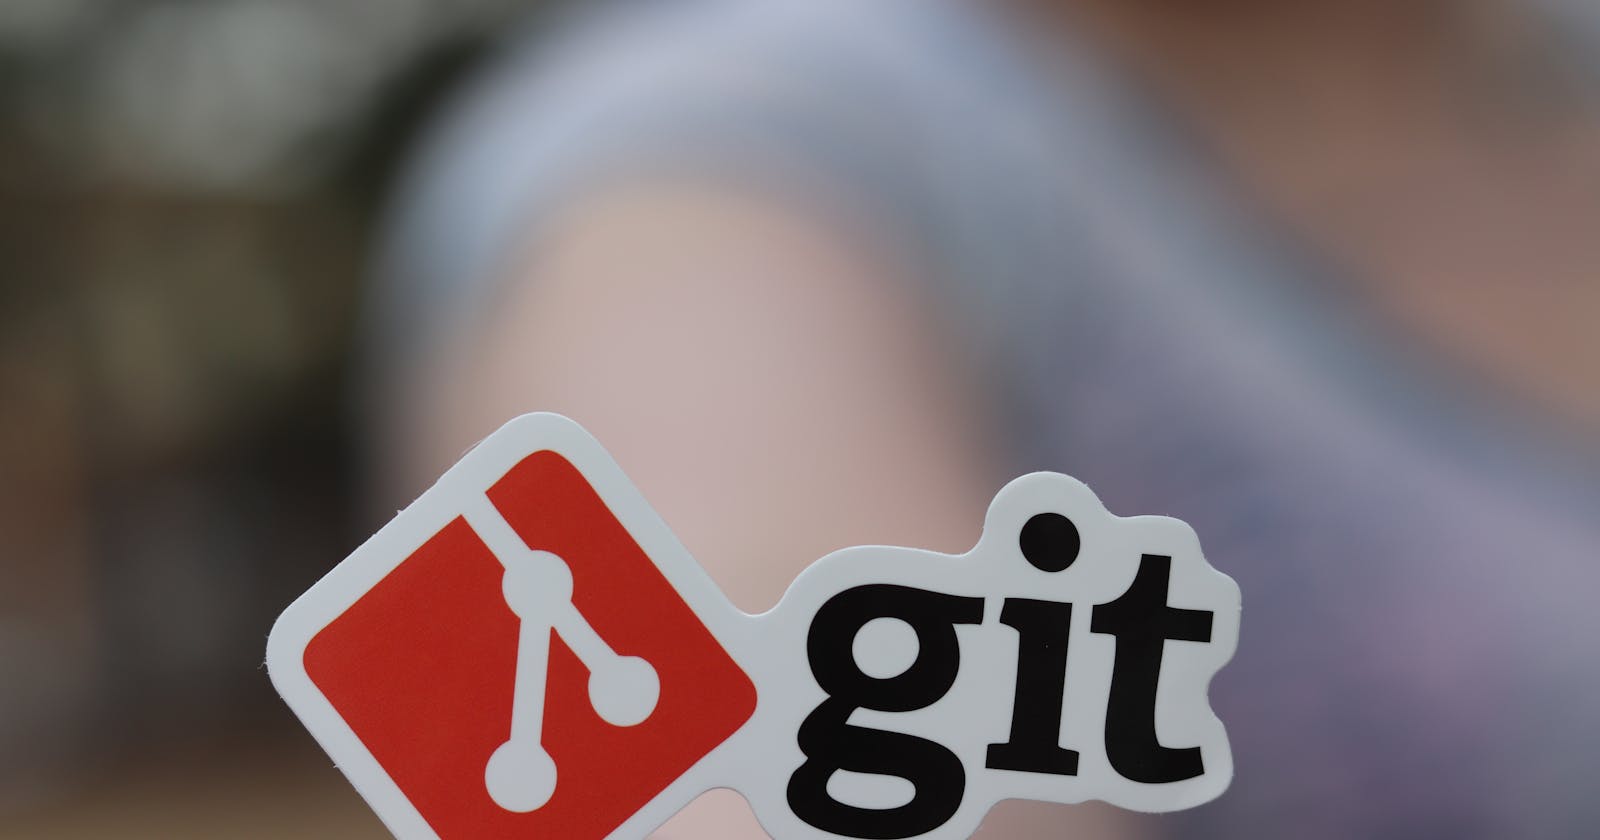 Why should you learn git as a student developer?